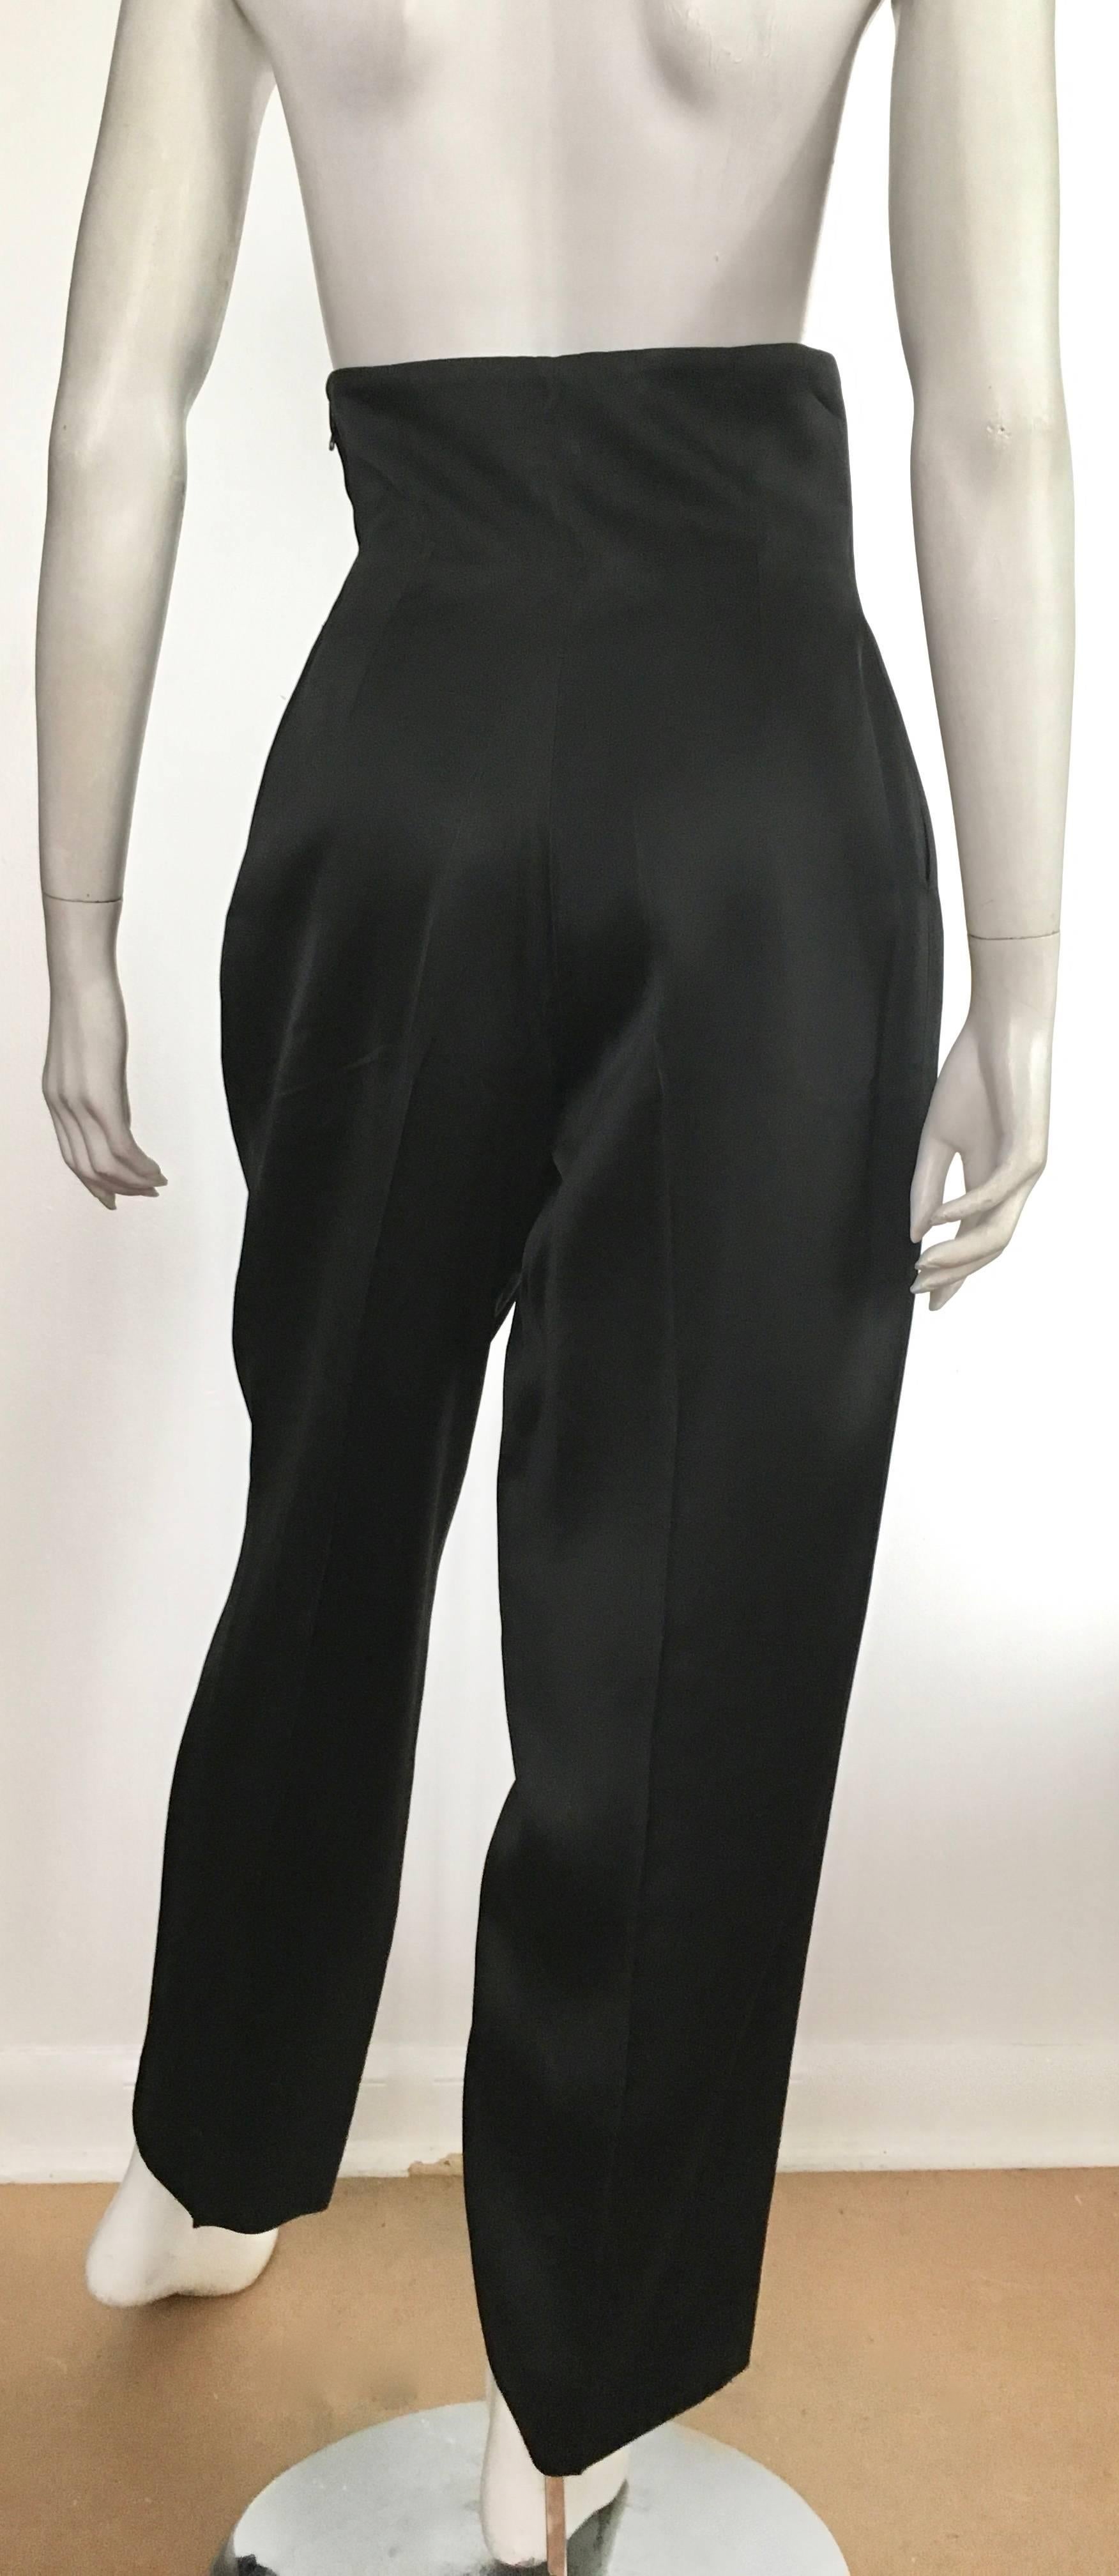 Patrick Kelly 1980s Black High Waisted Evening Pants with Pockets Size 4/6. 1